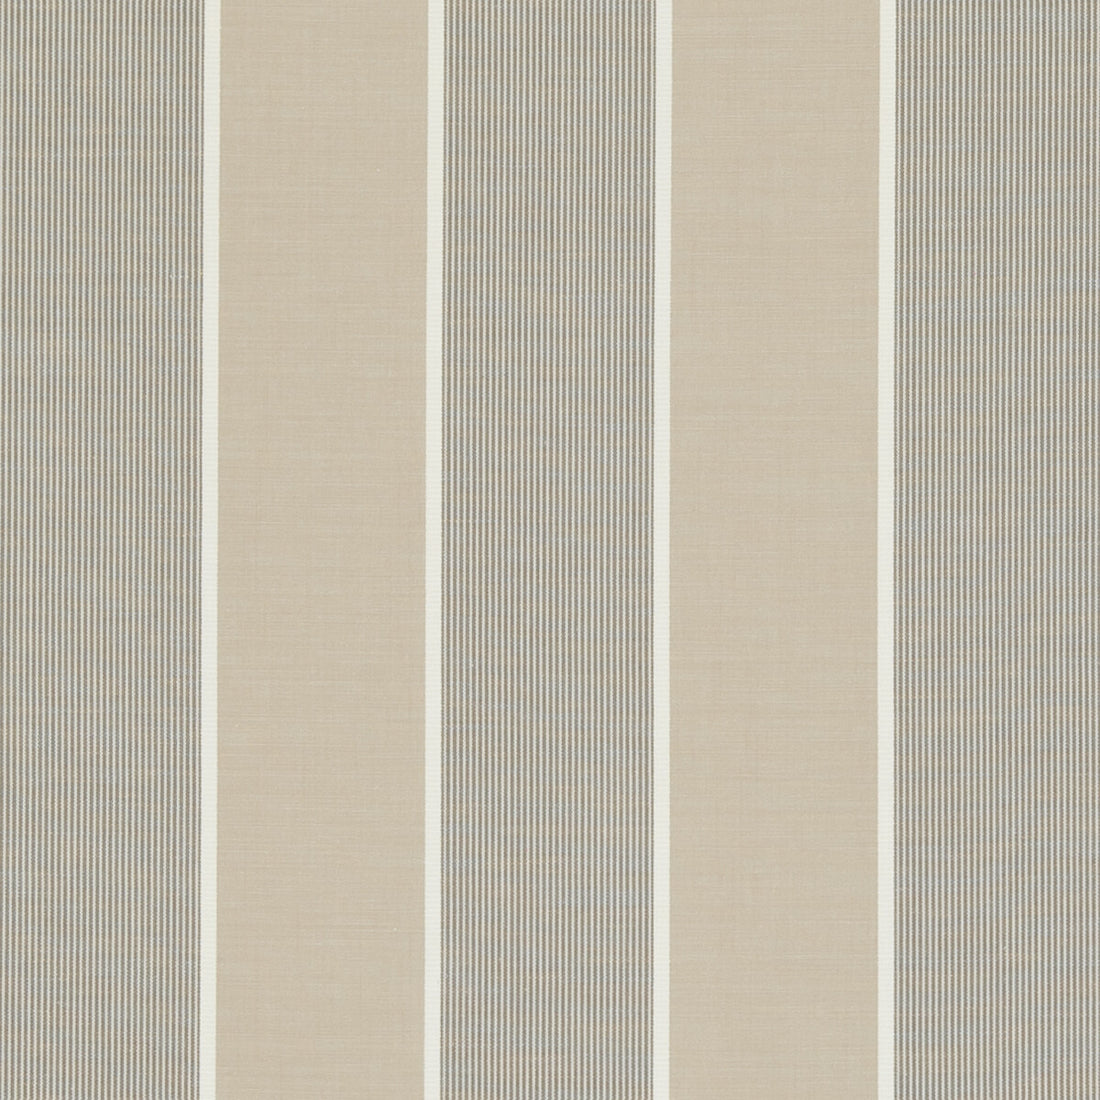 Chatburn fabric in natural color - pattern F0597/04.CAC.0 - by Clarke And Clarke in the Clarke &amp; Clarke Ribble Valley collection